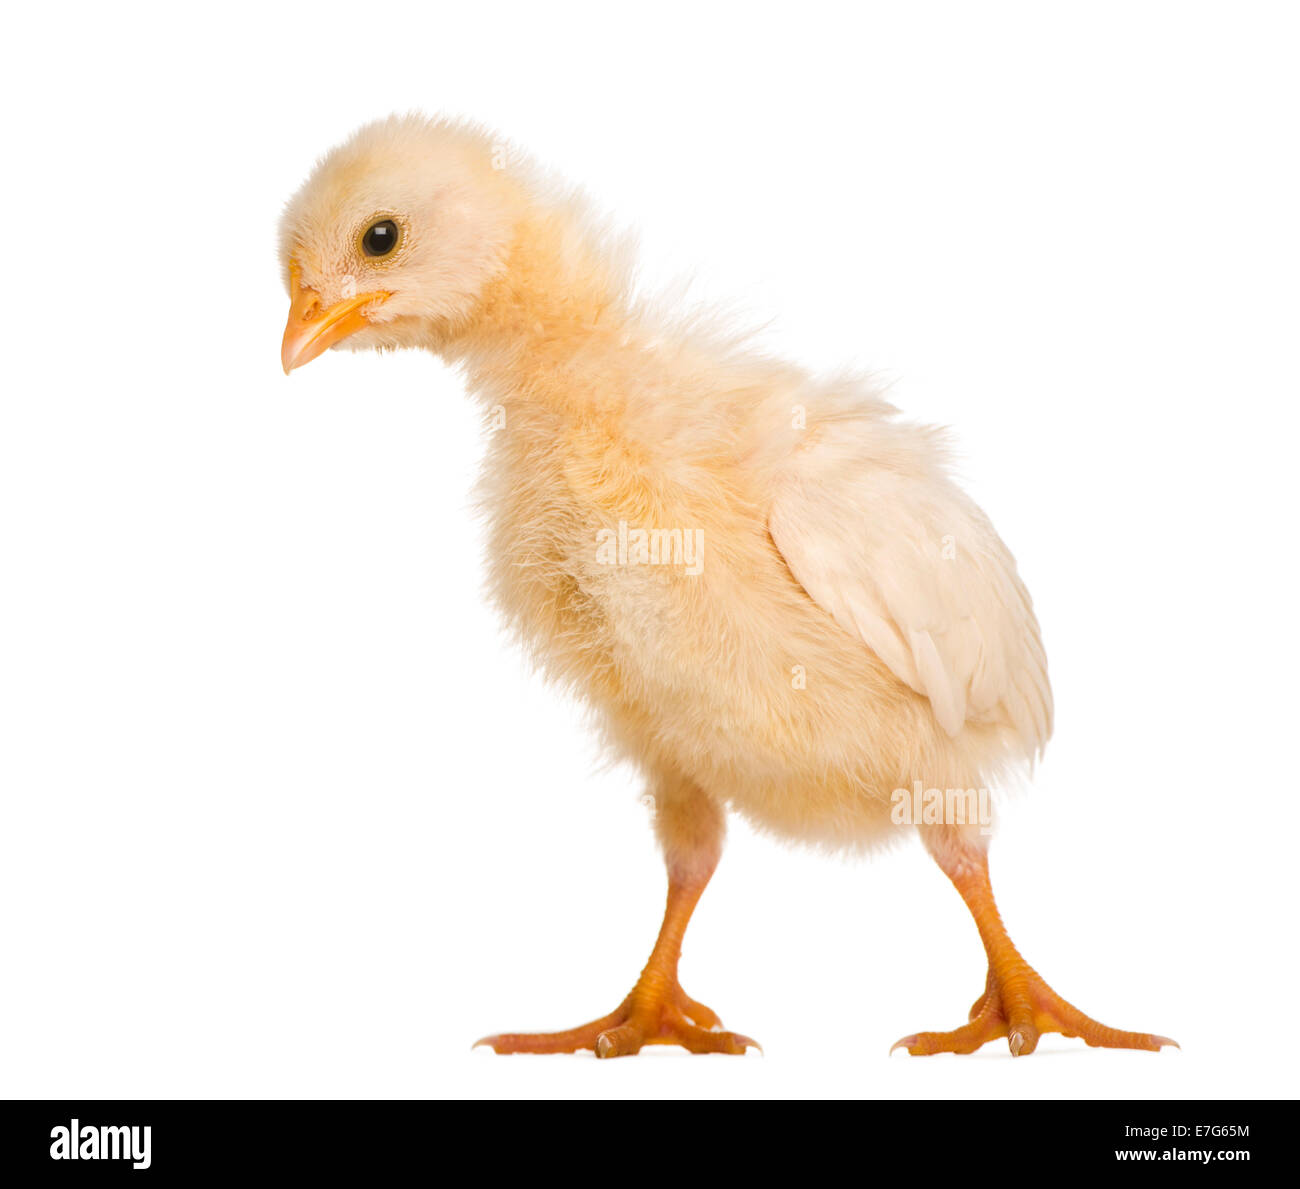 Chick ,8 days old, in front of white background Stock Photo